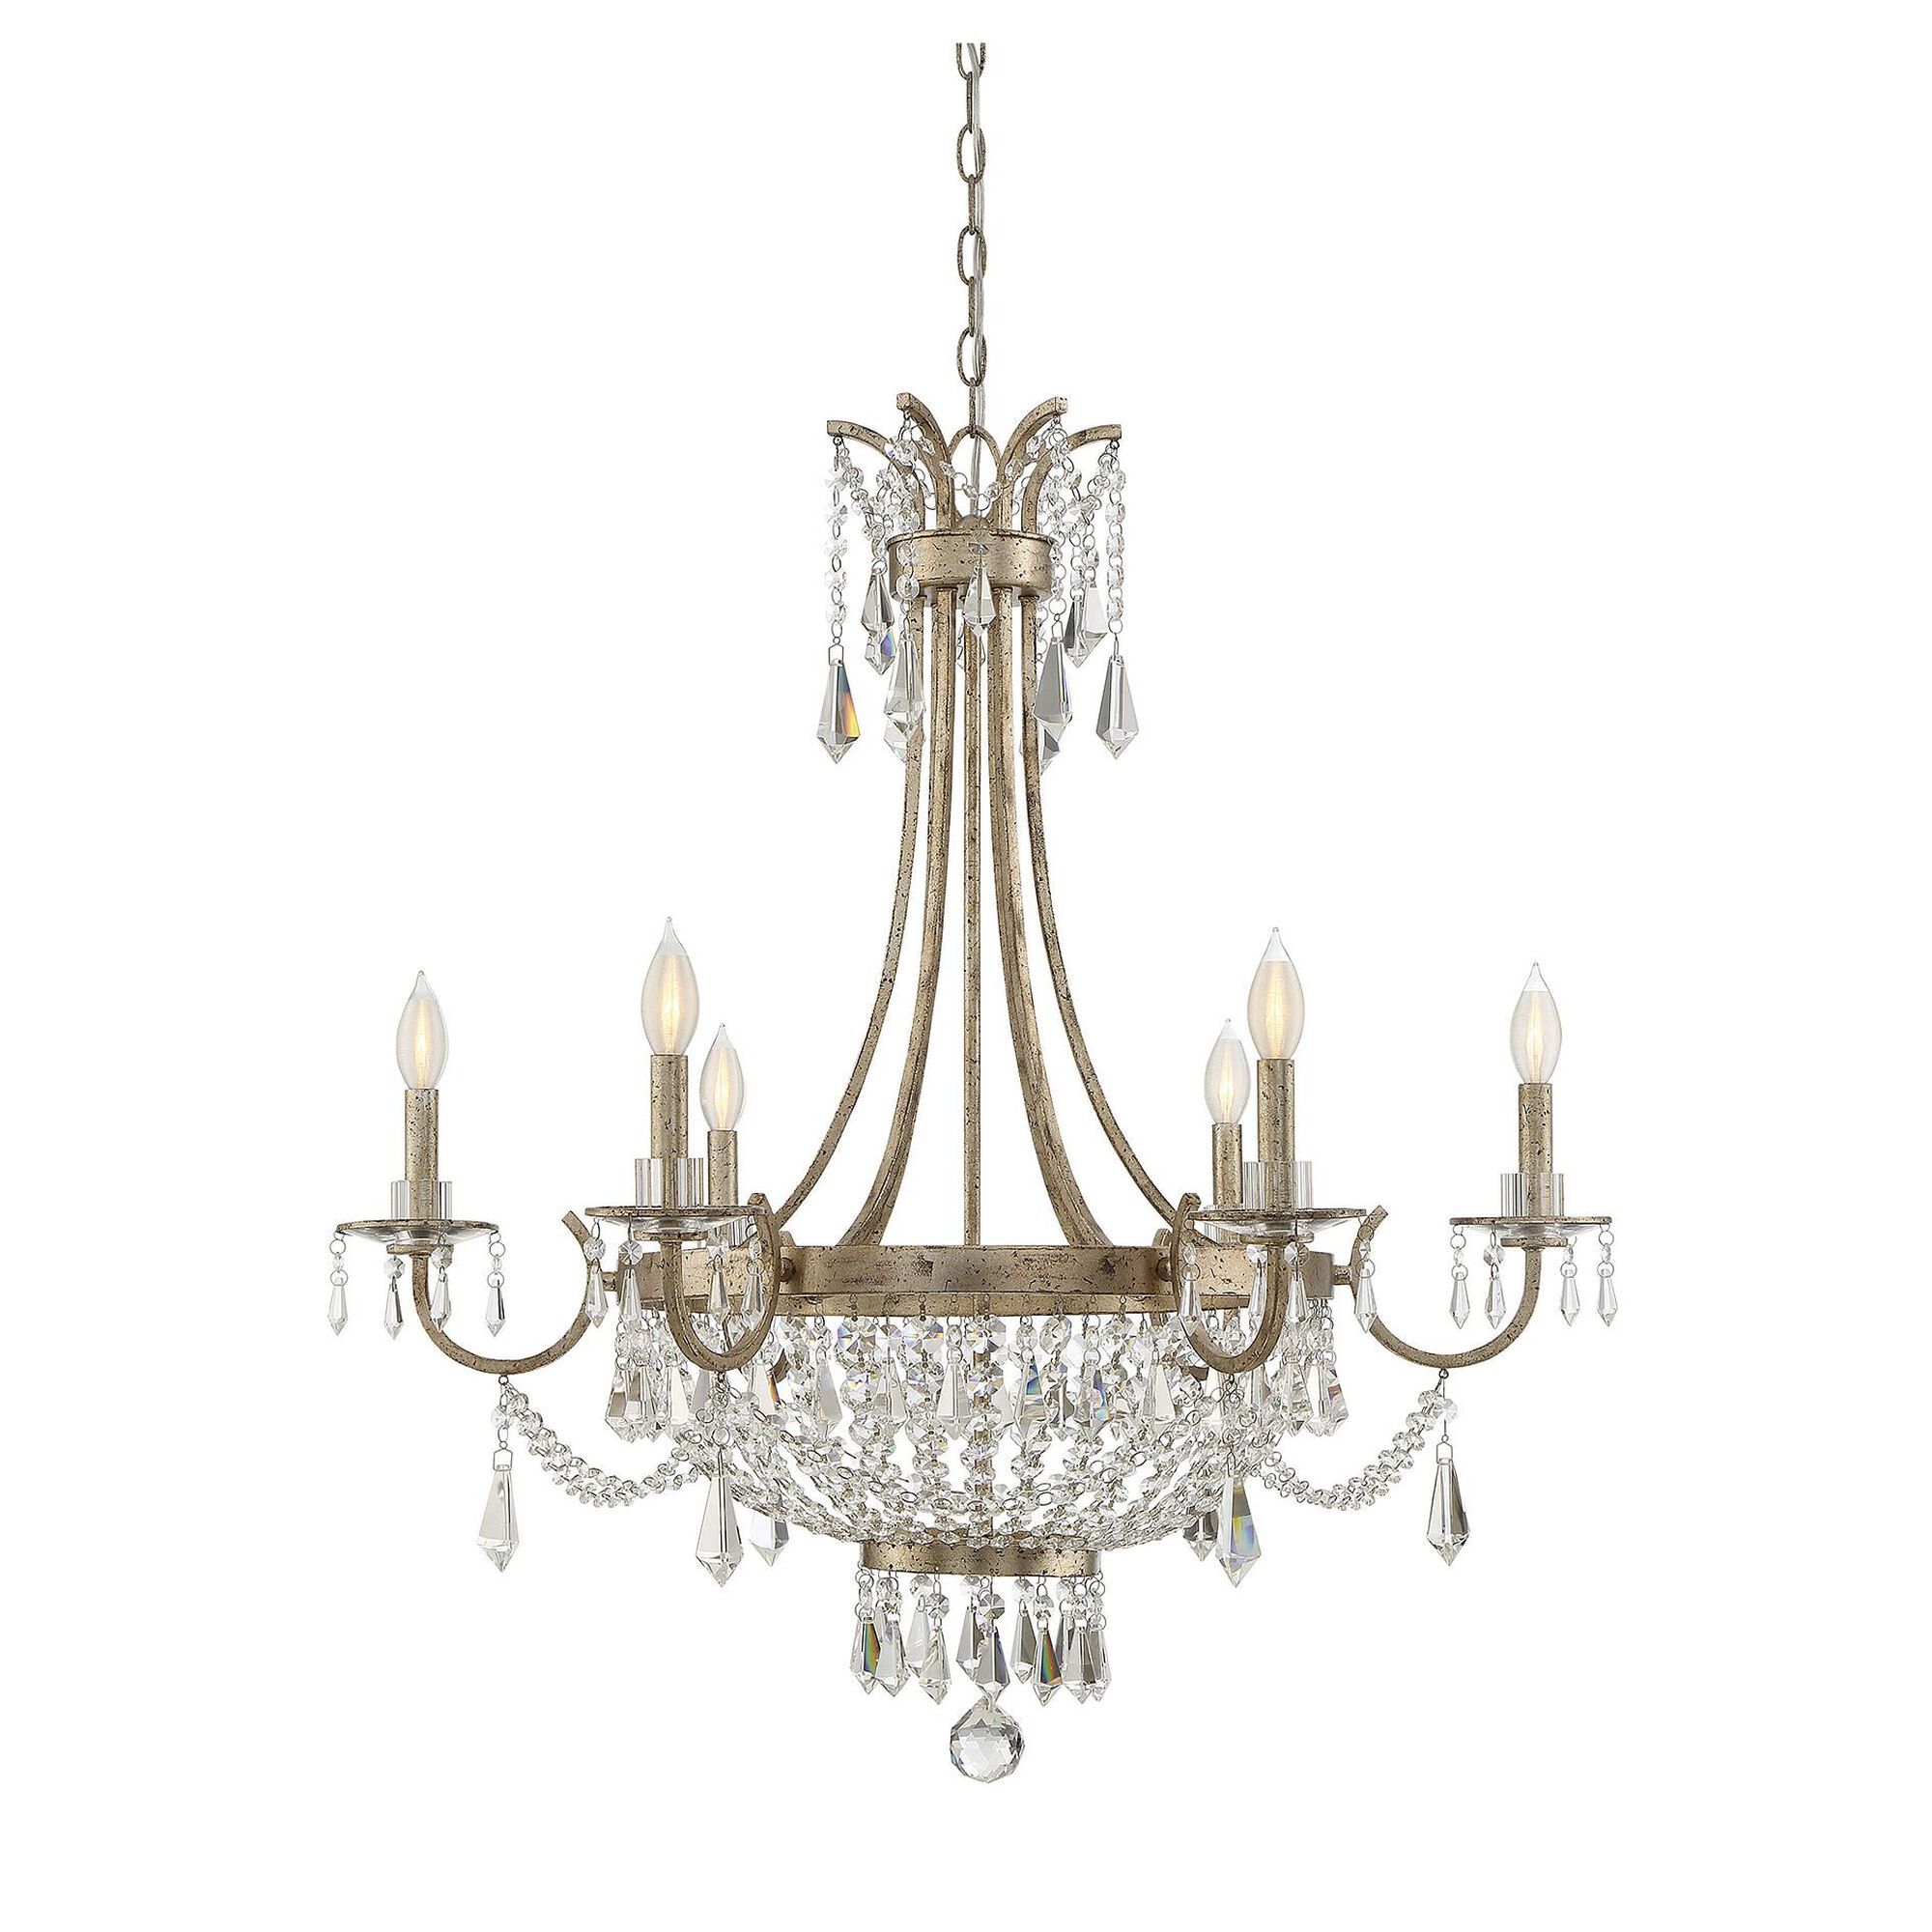 Brian Thomas Claiborne 33 Inch 6 Light Chandelier by Savoy House | 1800 Lighting